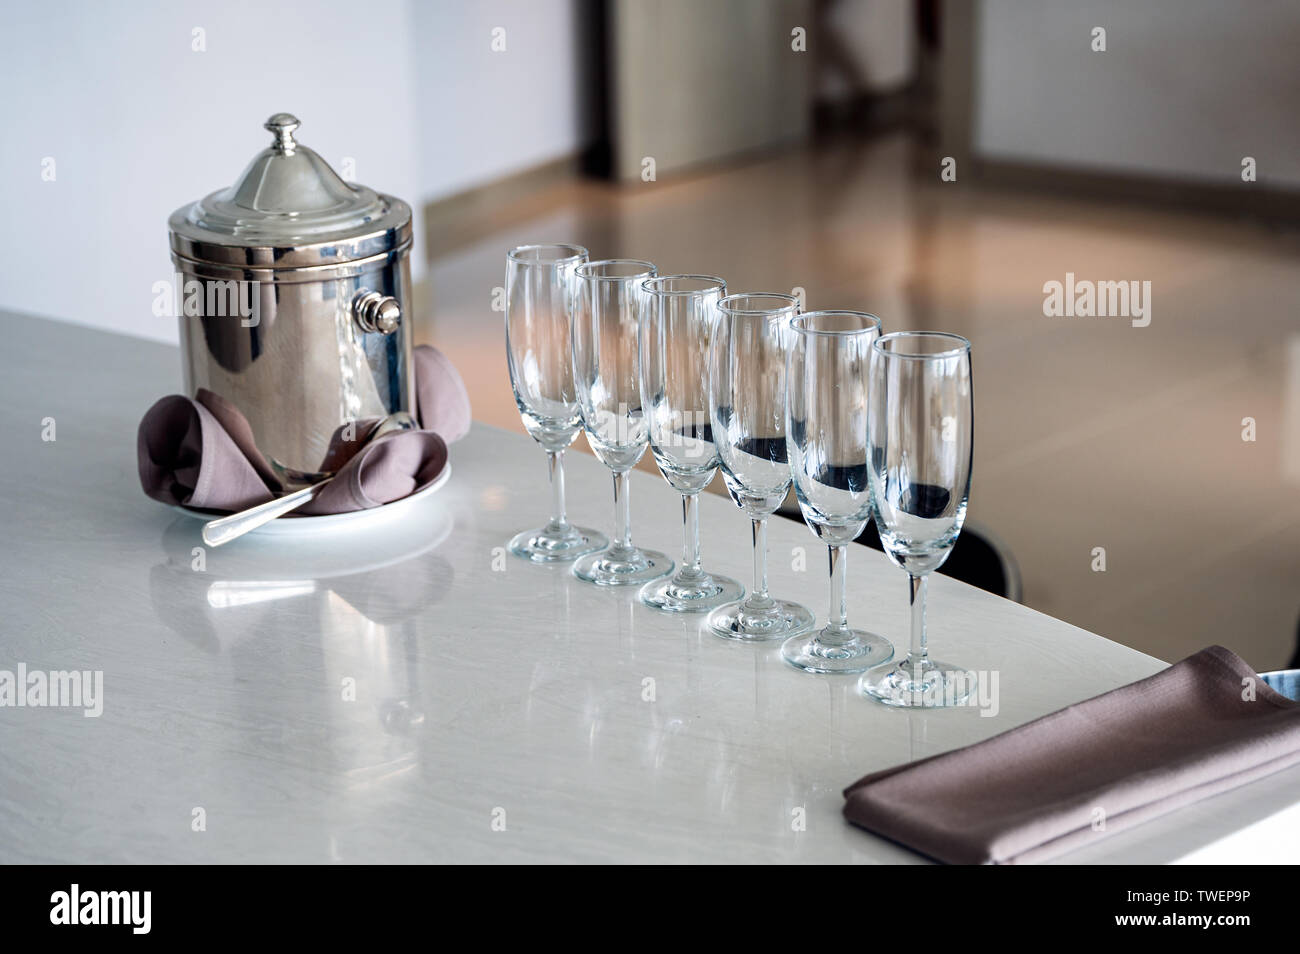 Arrangement of wine glass with stainless bucket on marble bar Stock Photo